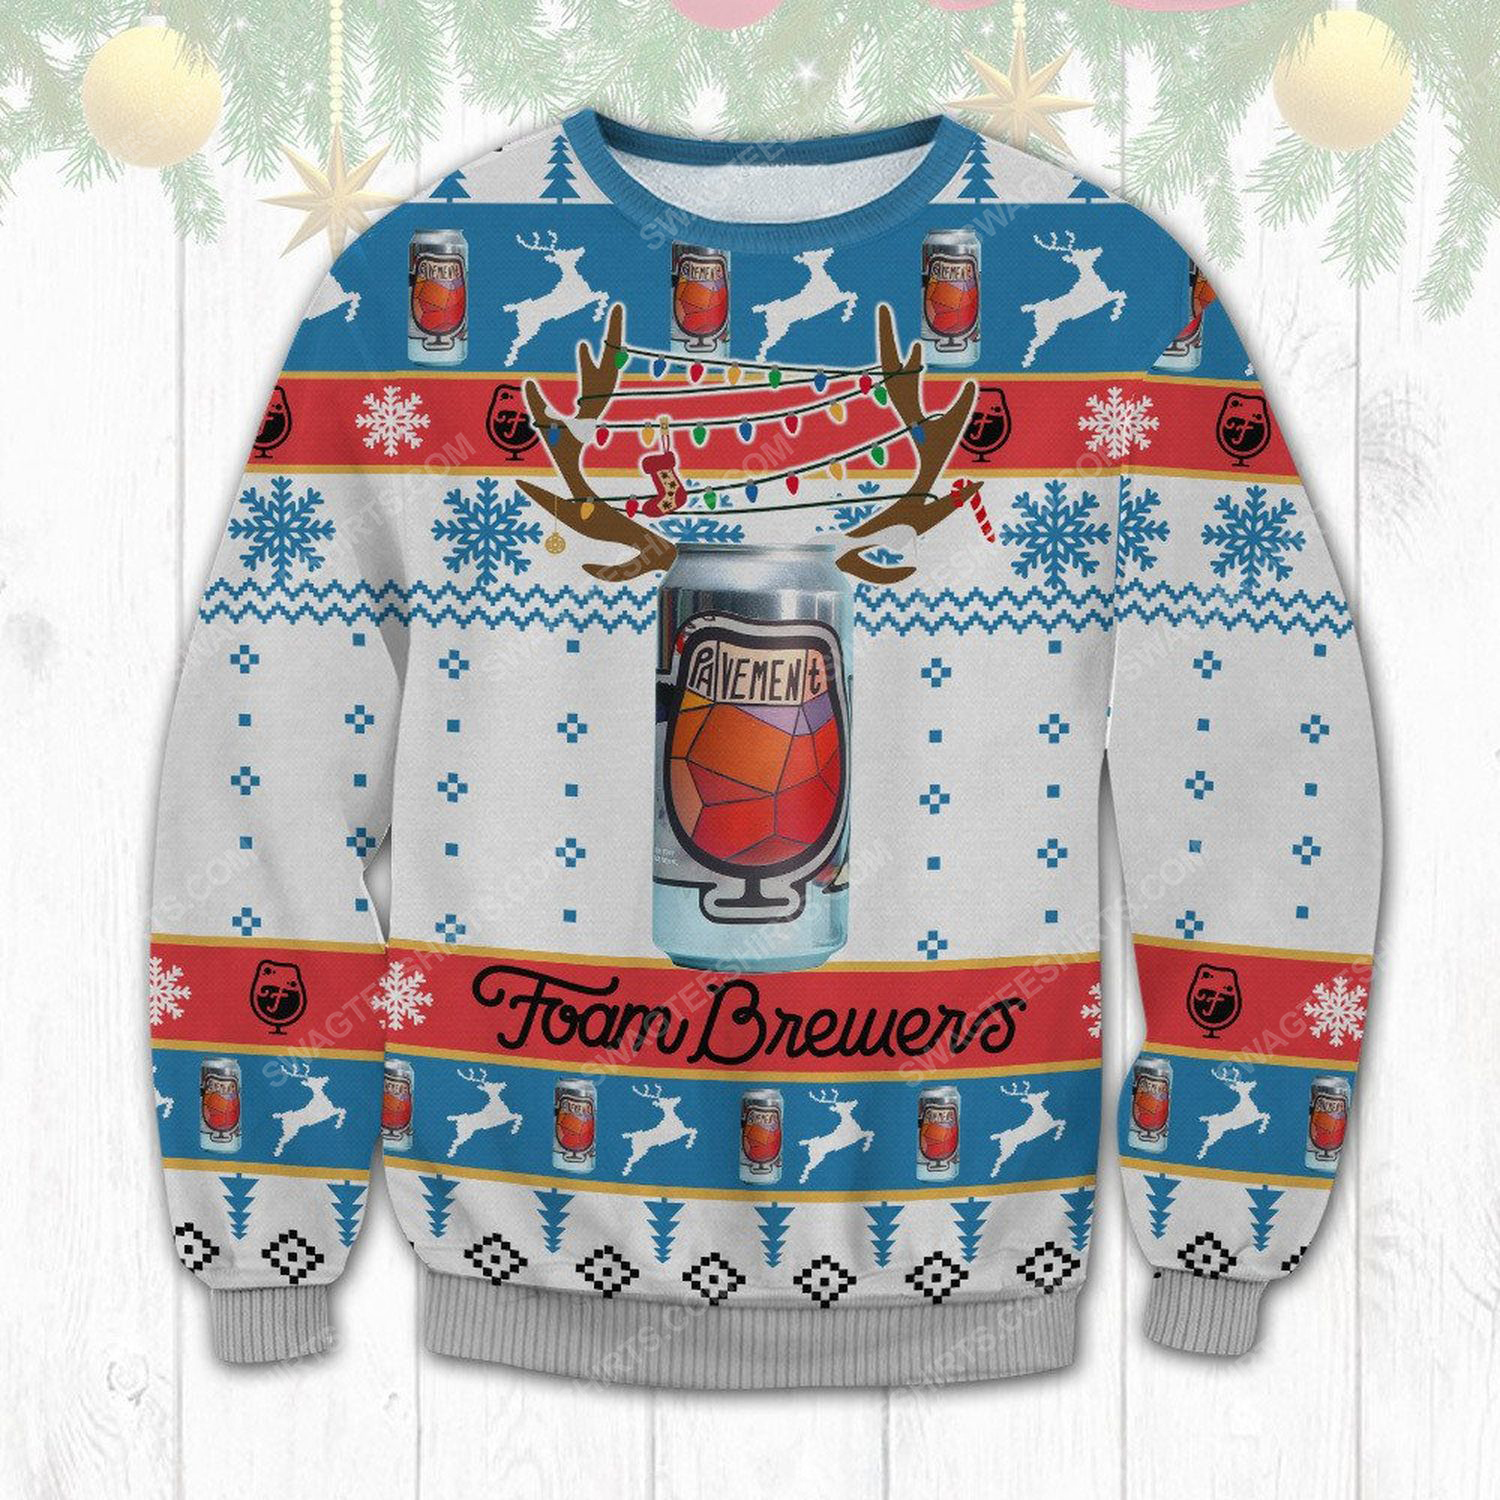 Pavement foam brewers ugly christmas sweater